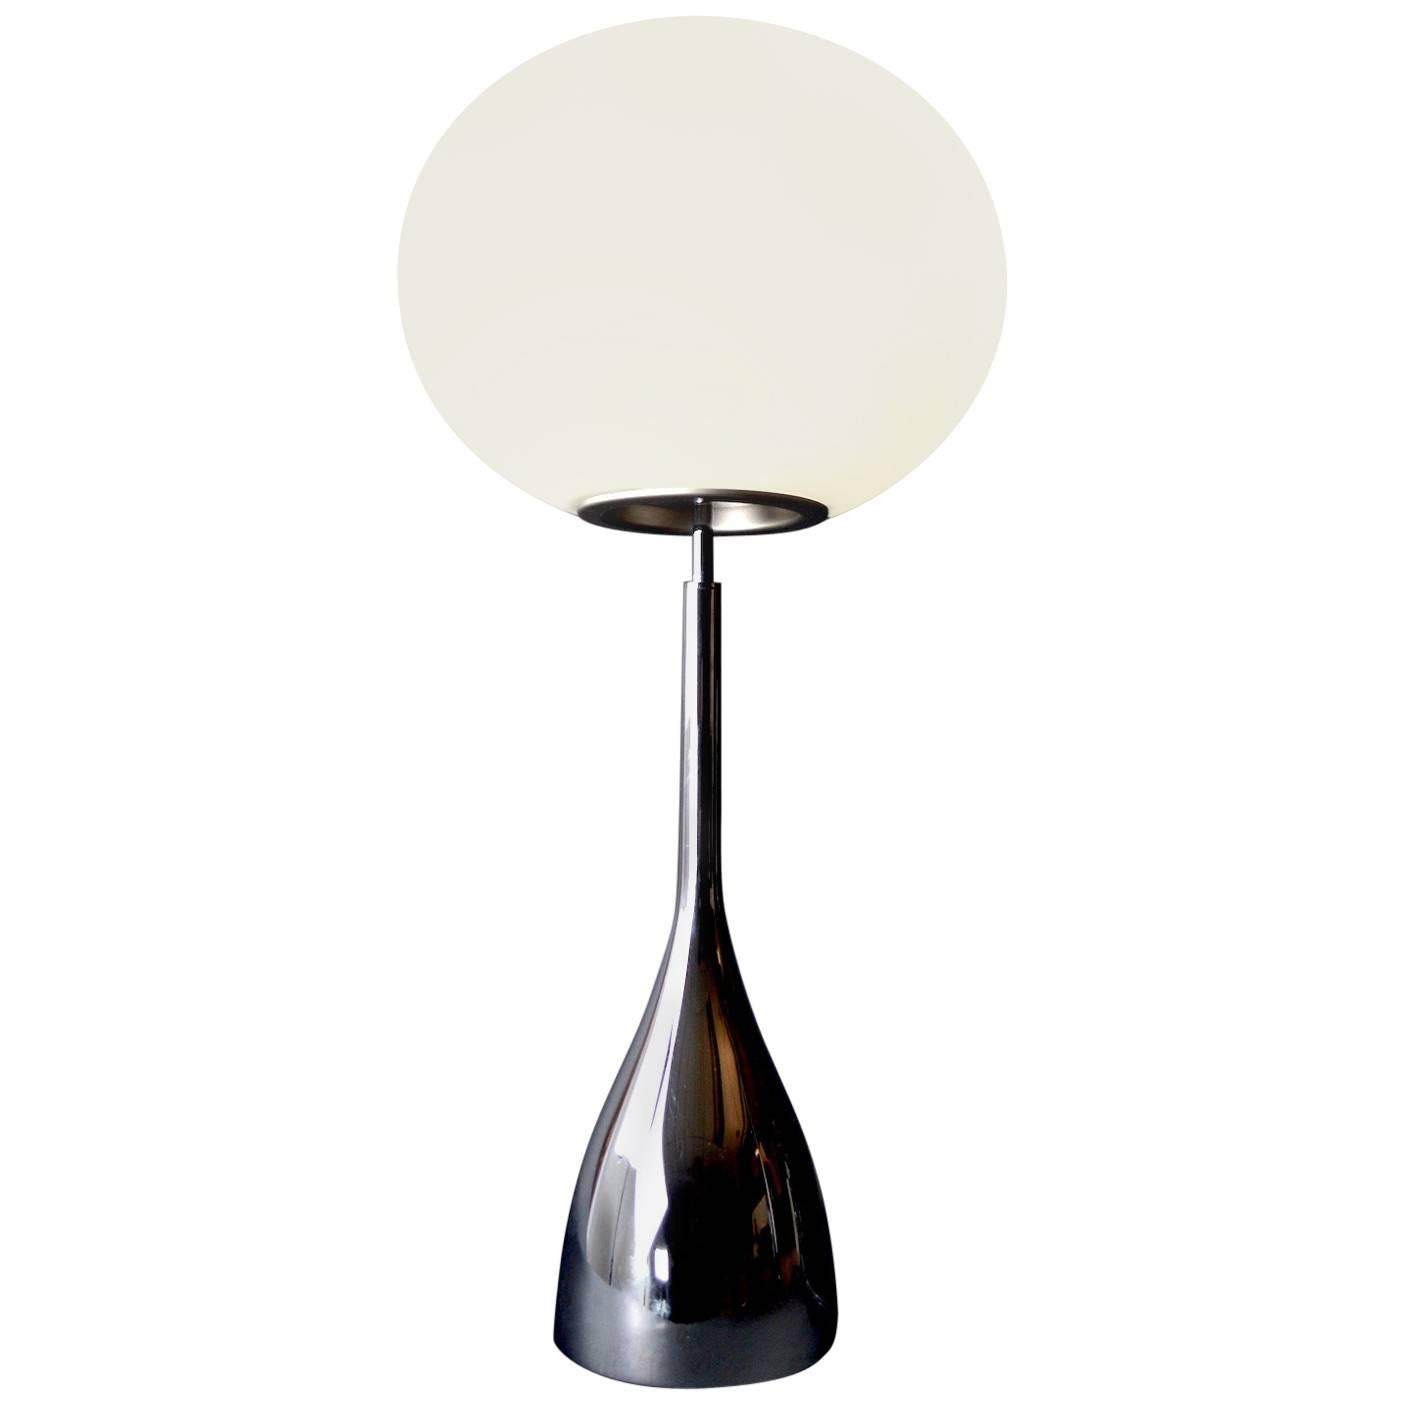 Ball Top Lamp by Leucos